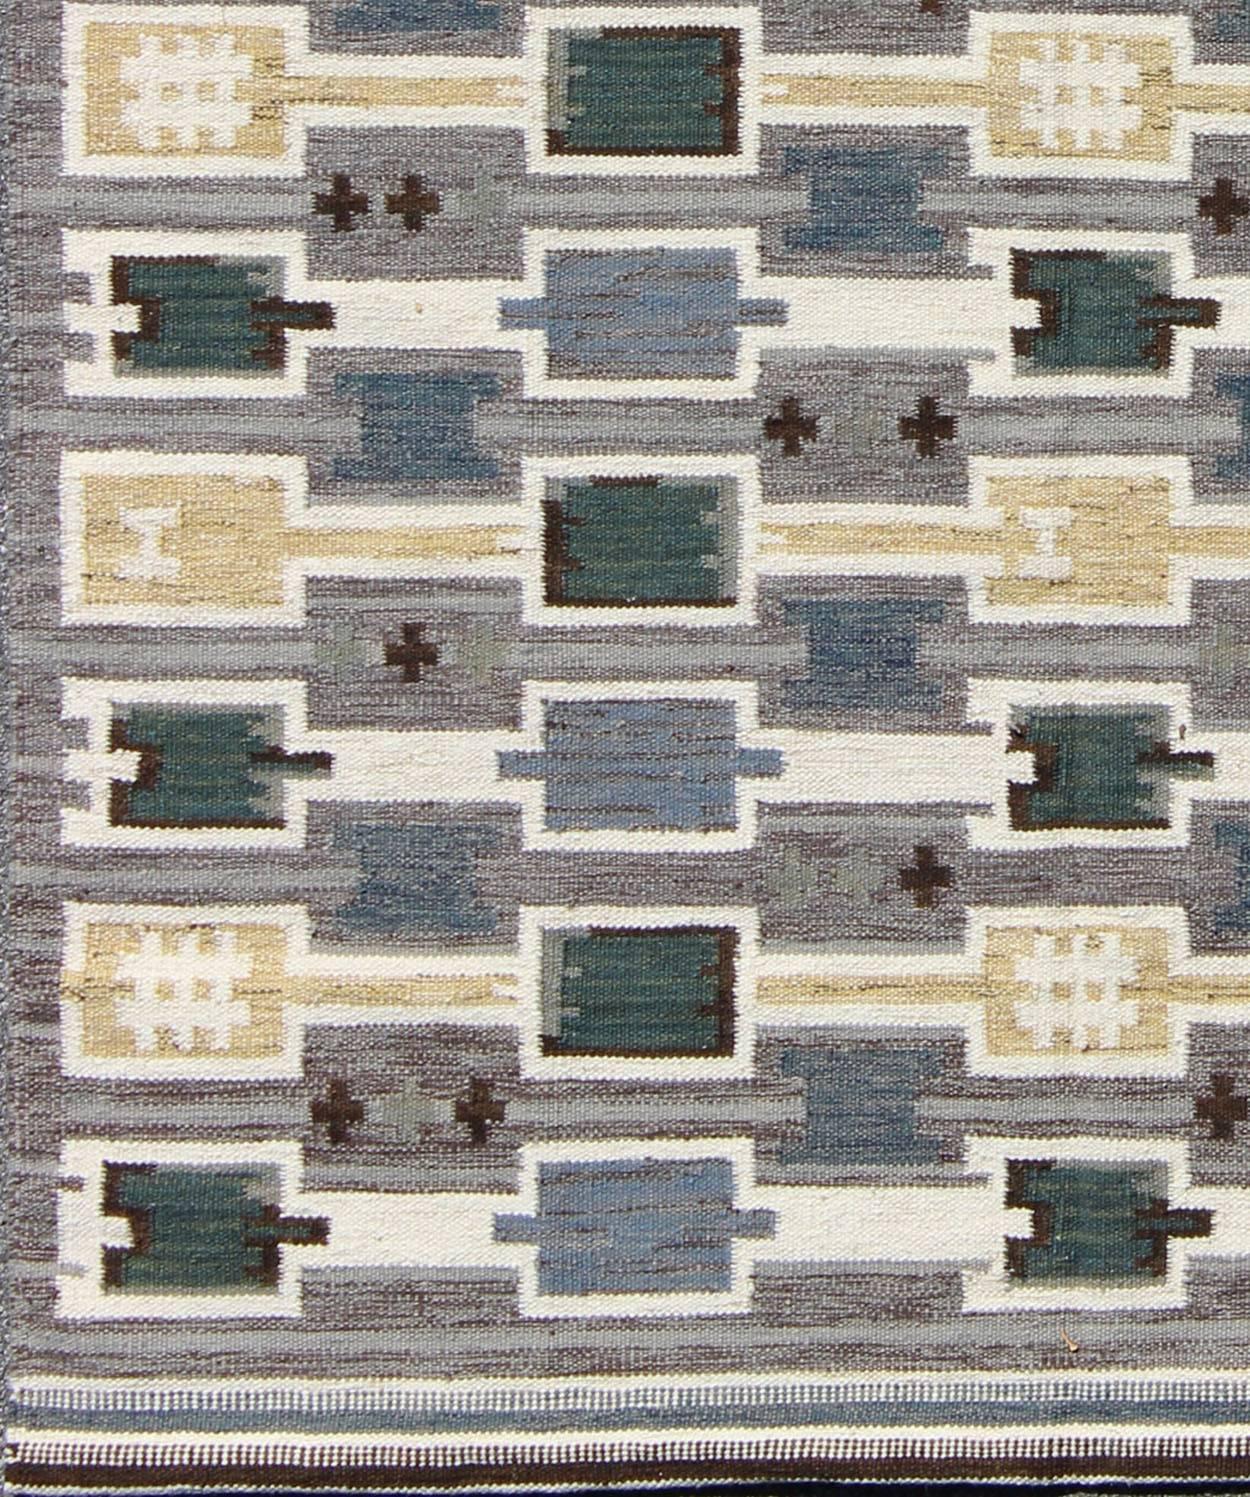 This Scandinavian flat-weave rug is inspired by the work of Swedish textile designers of the early to mid-20th century. With a unique blend of historical and modern design, this dynamic and exciting composition is beautifully suited for contemporary